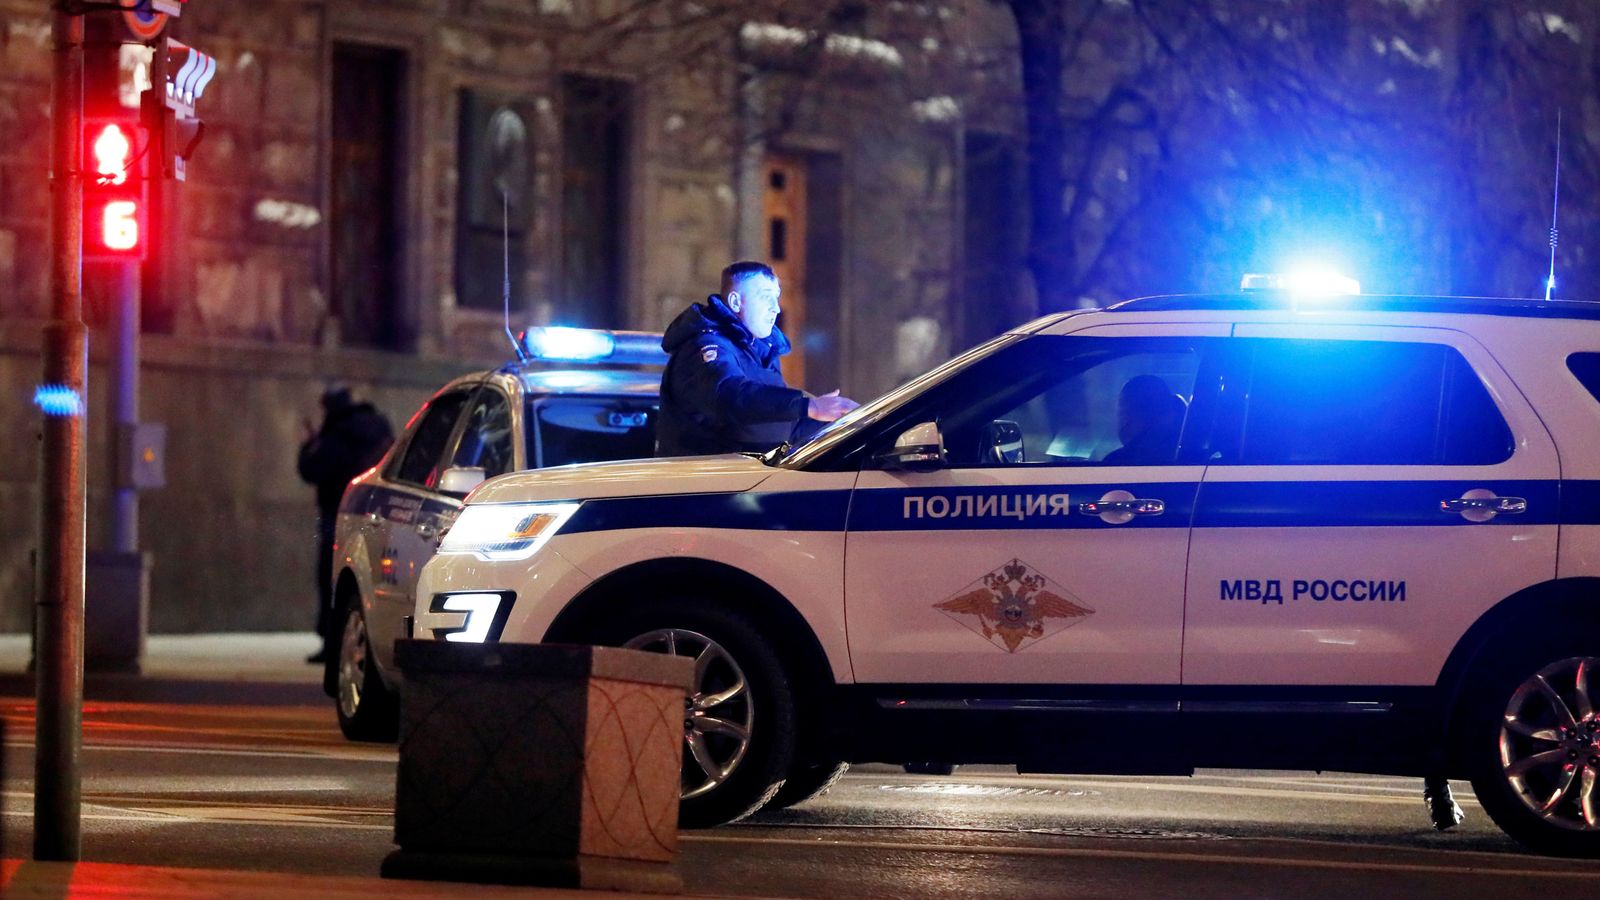 FSB shooting One dead after attack outside Russian spy office in